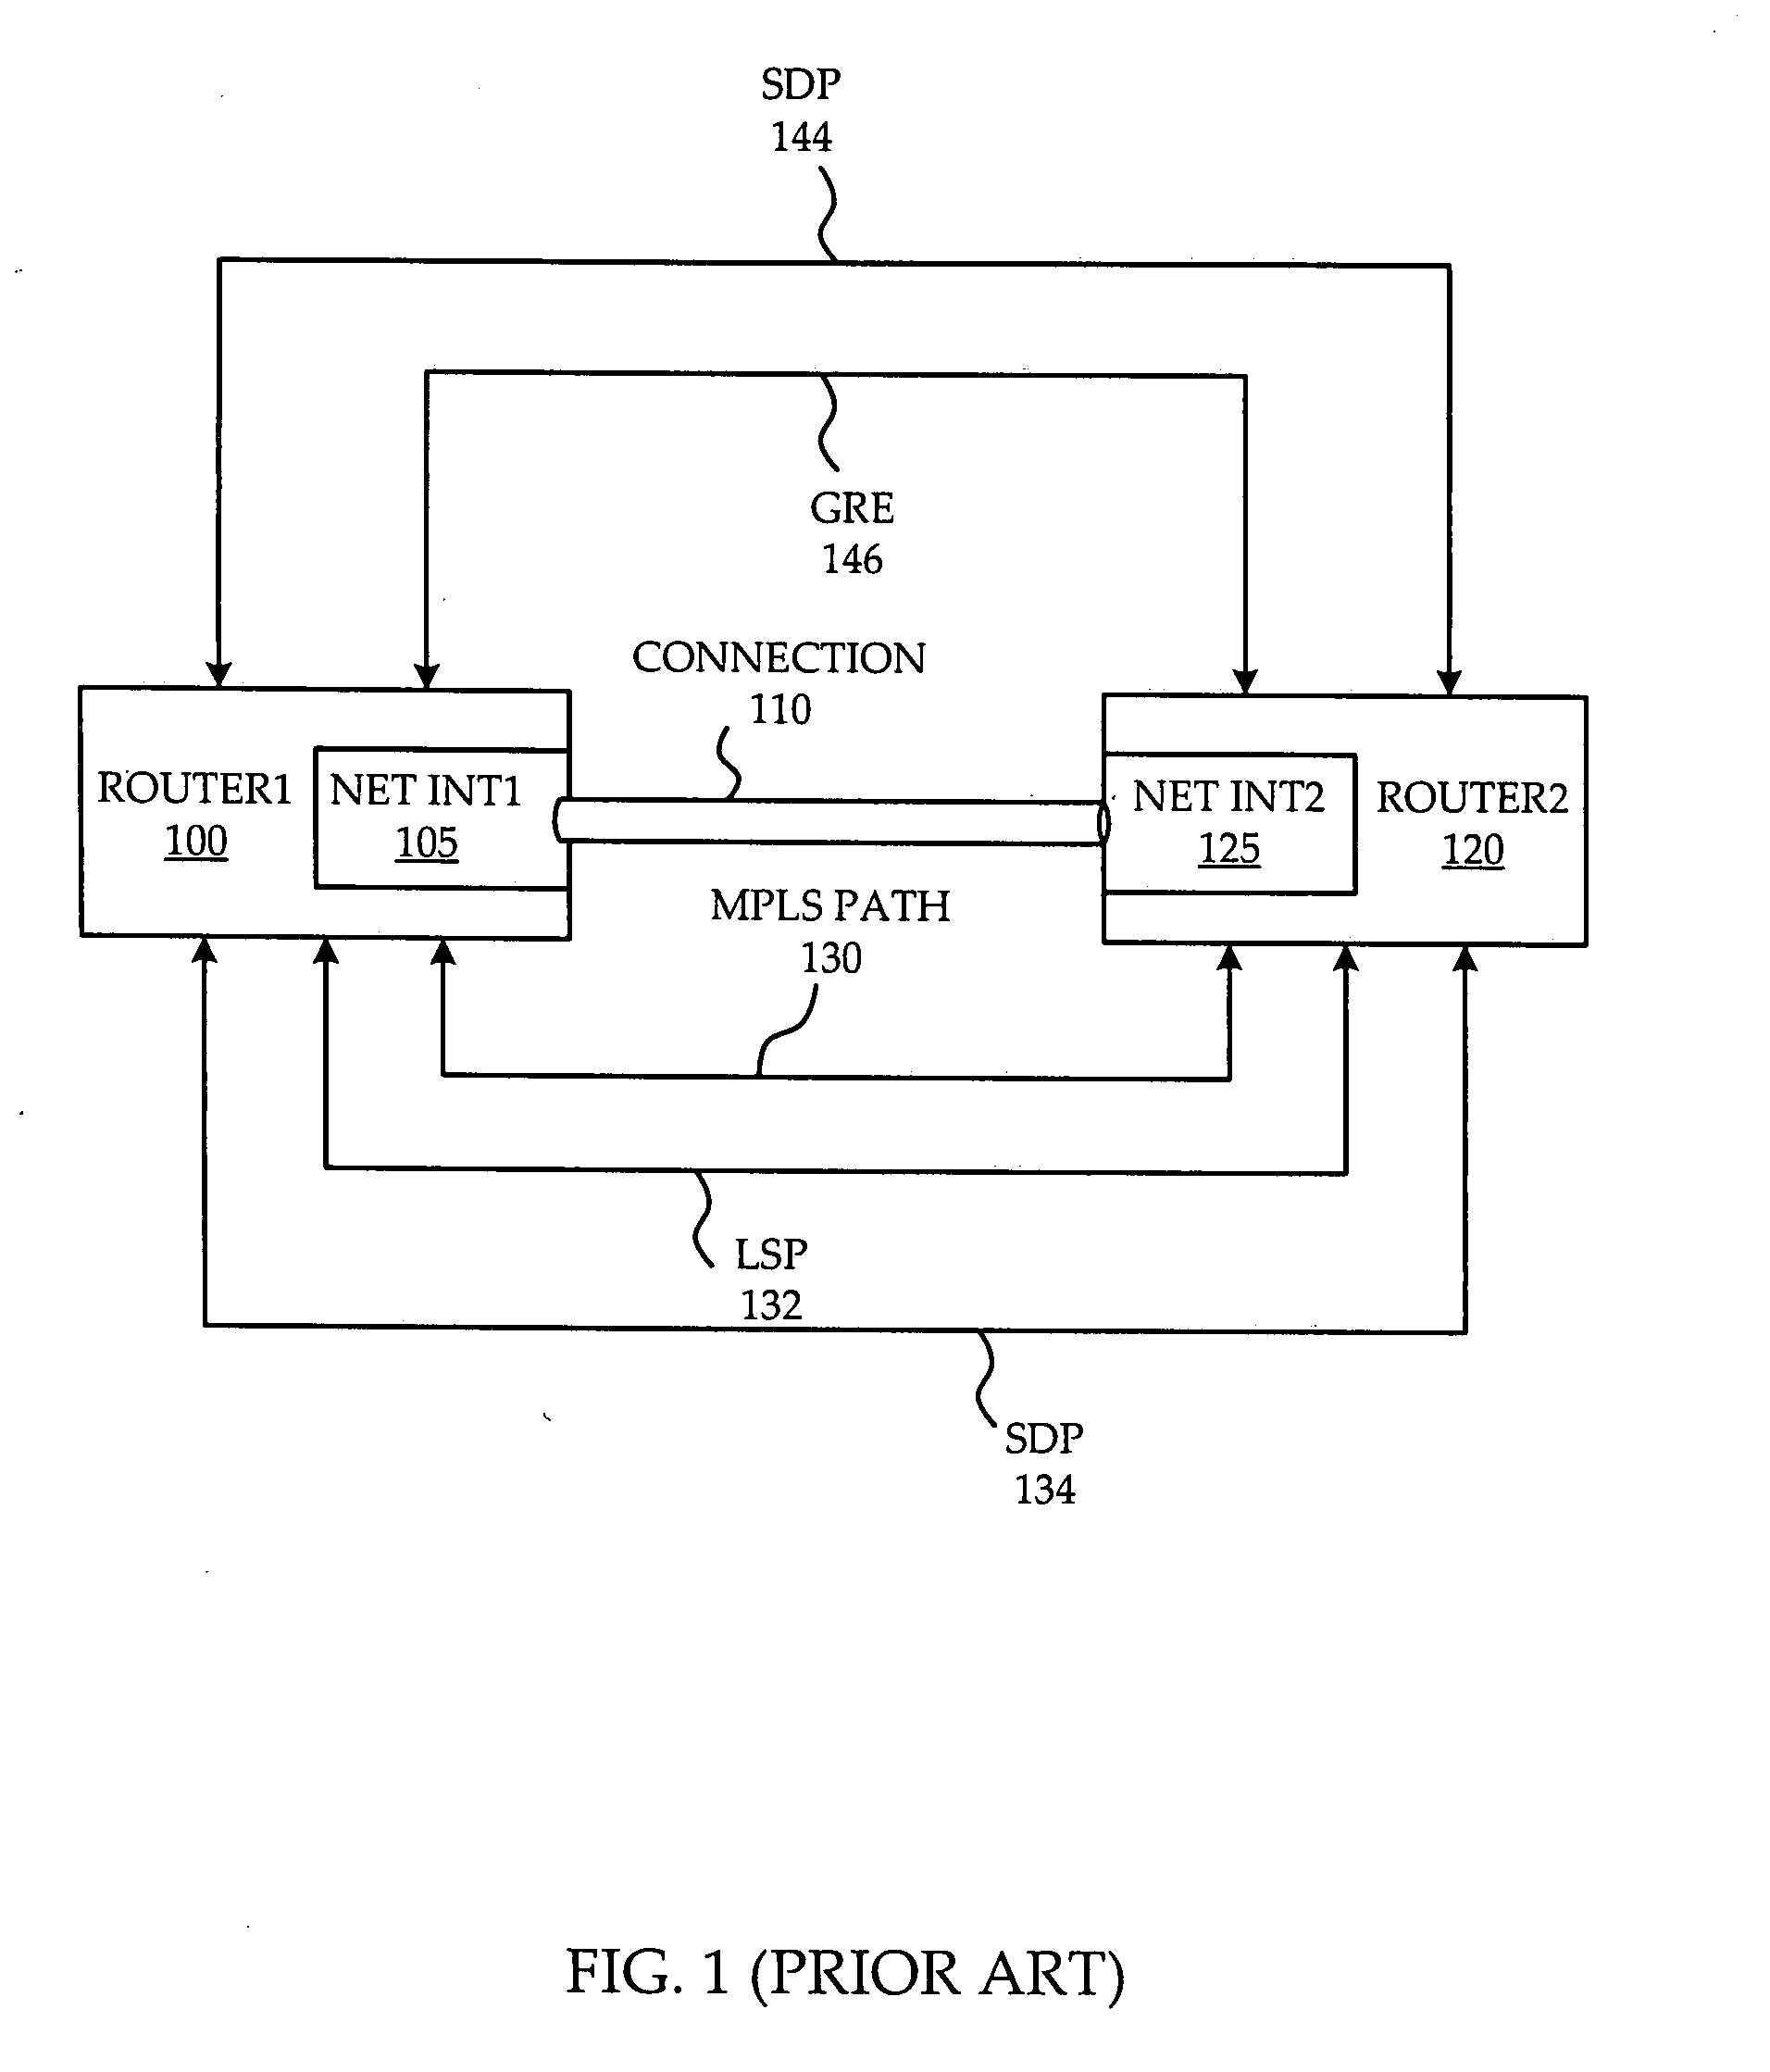 User interface system and method for inter-router protocol and transport configuration